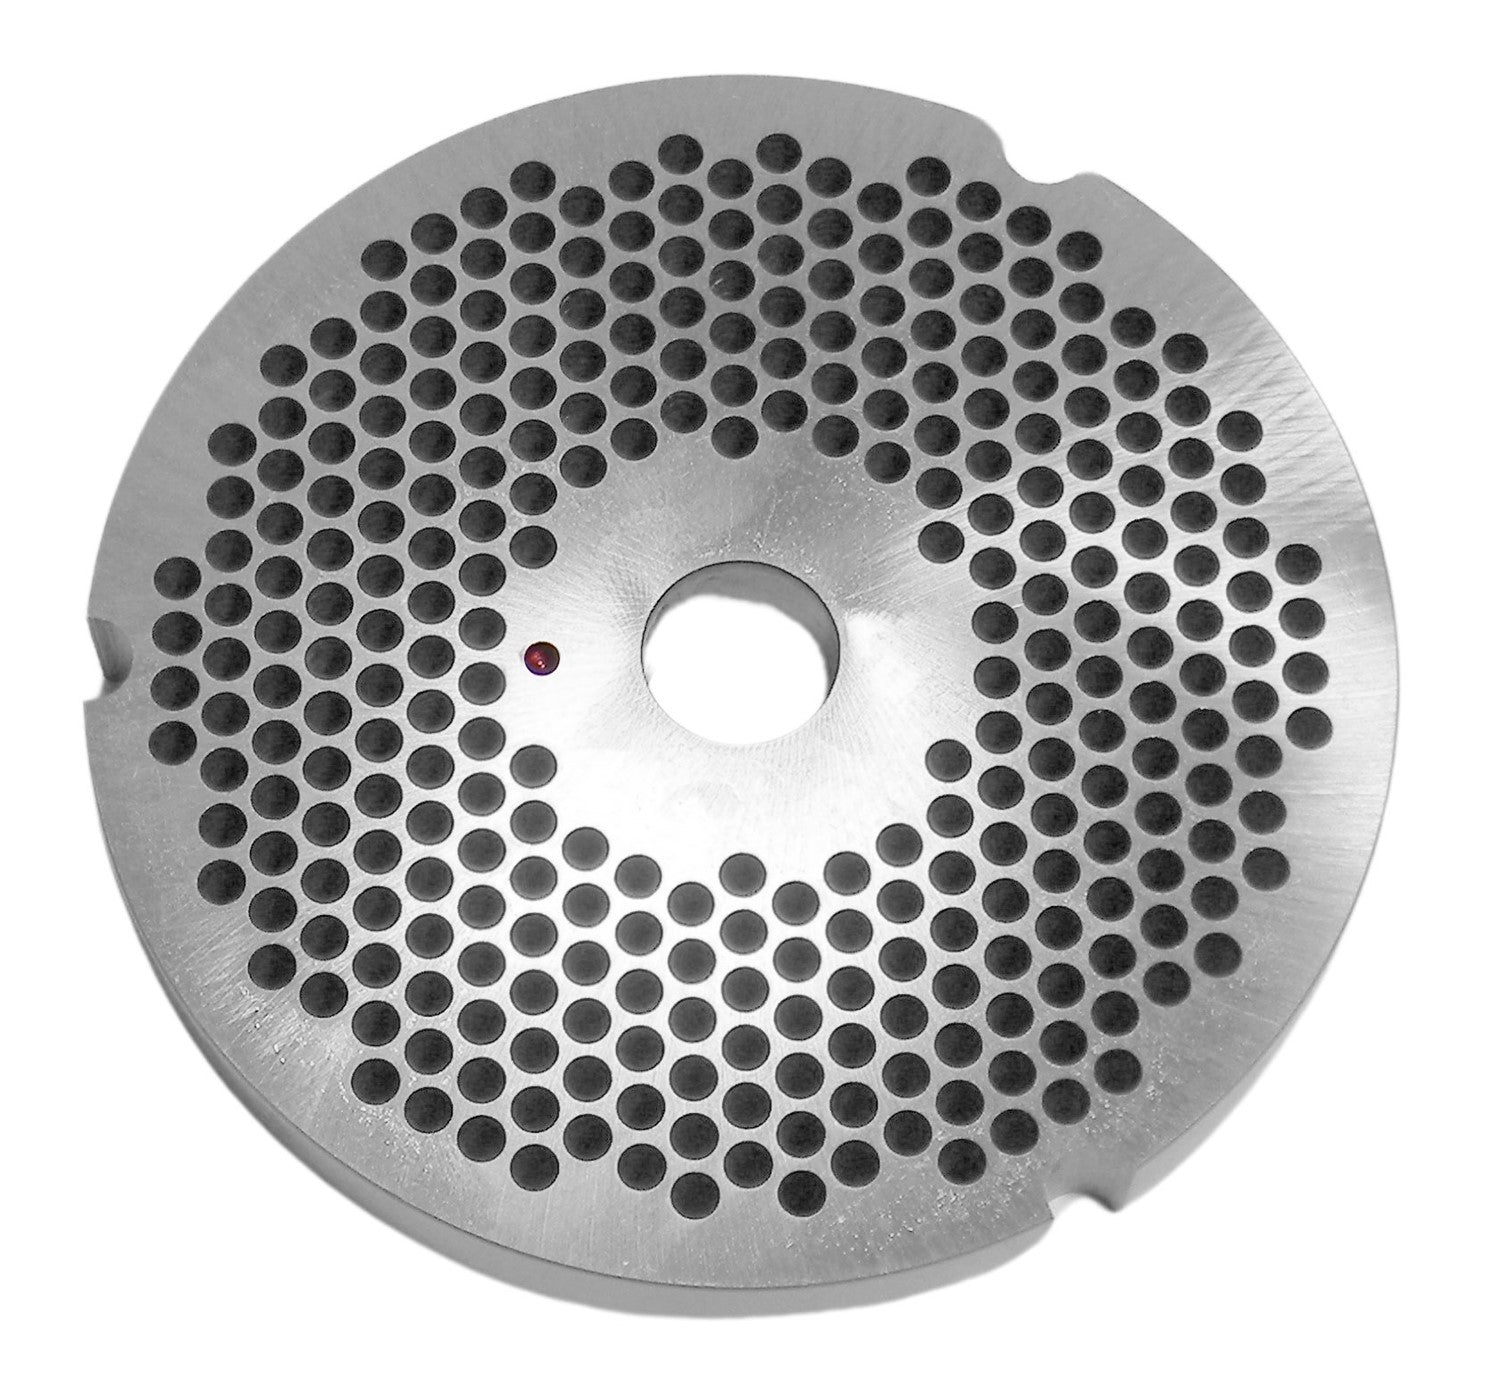 Size 56 DC Reversible Meat Grinder Plate, 3/16